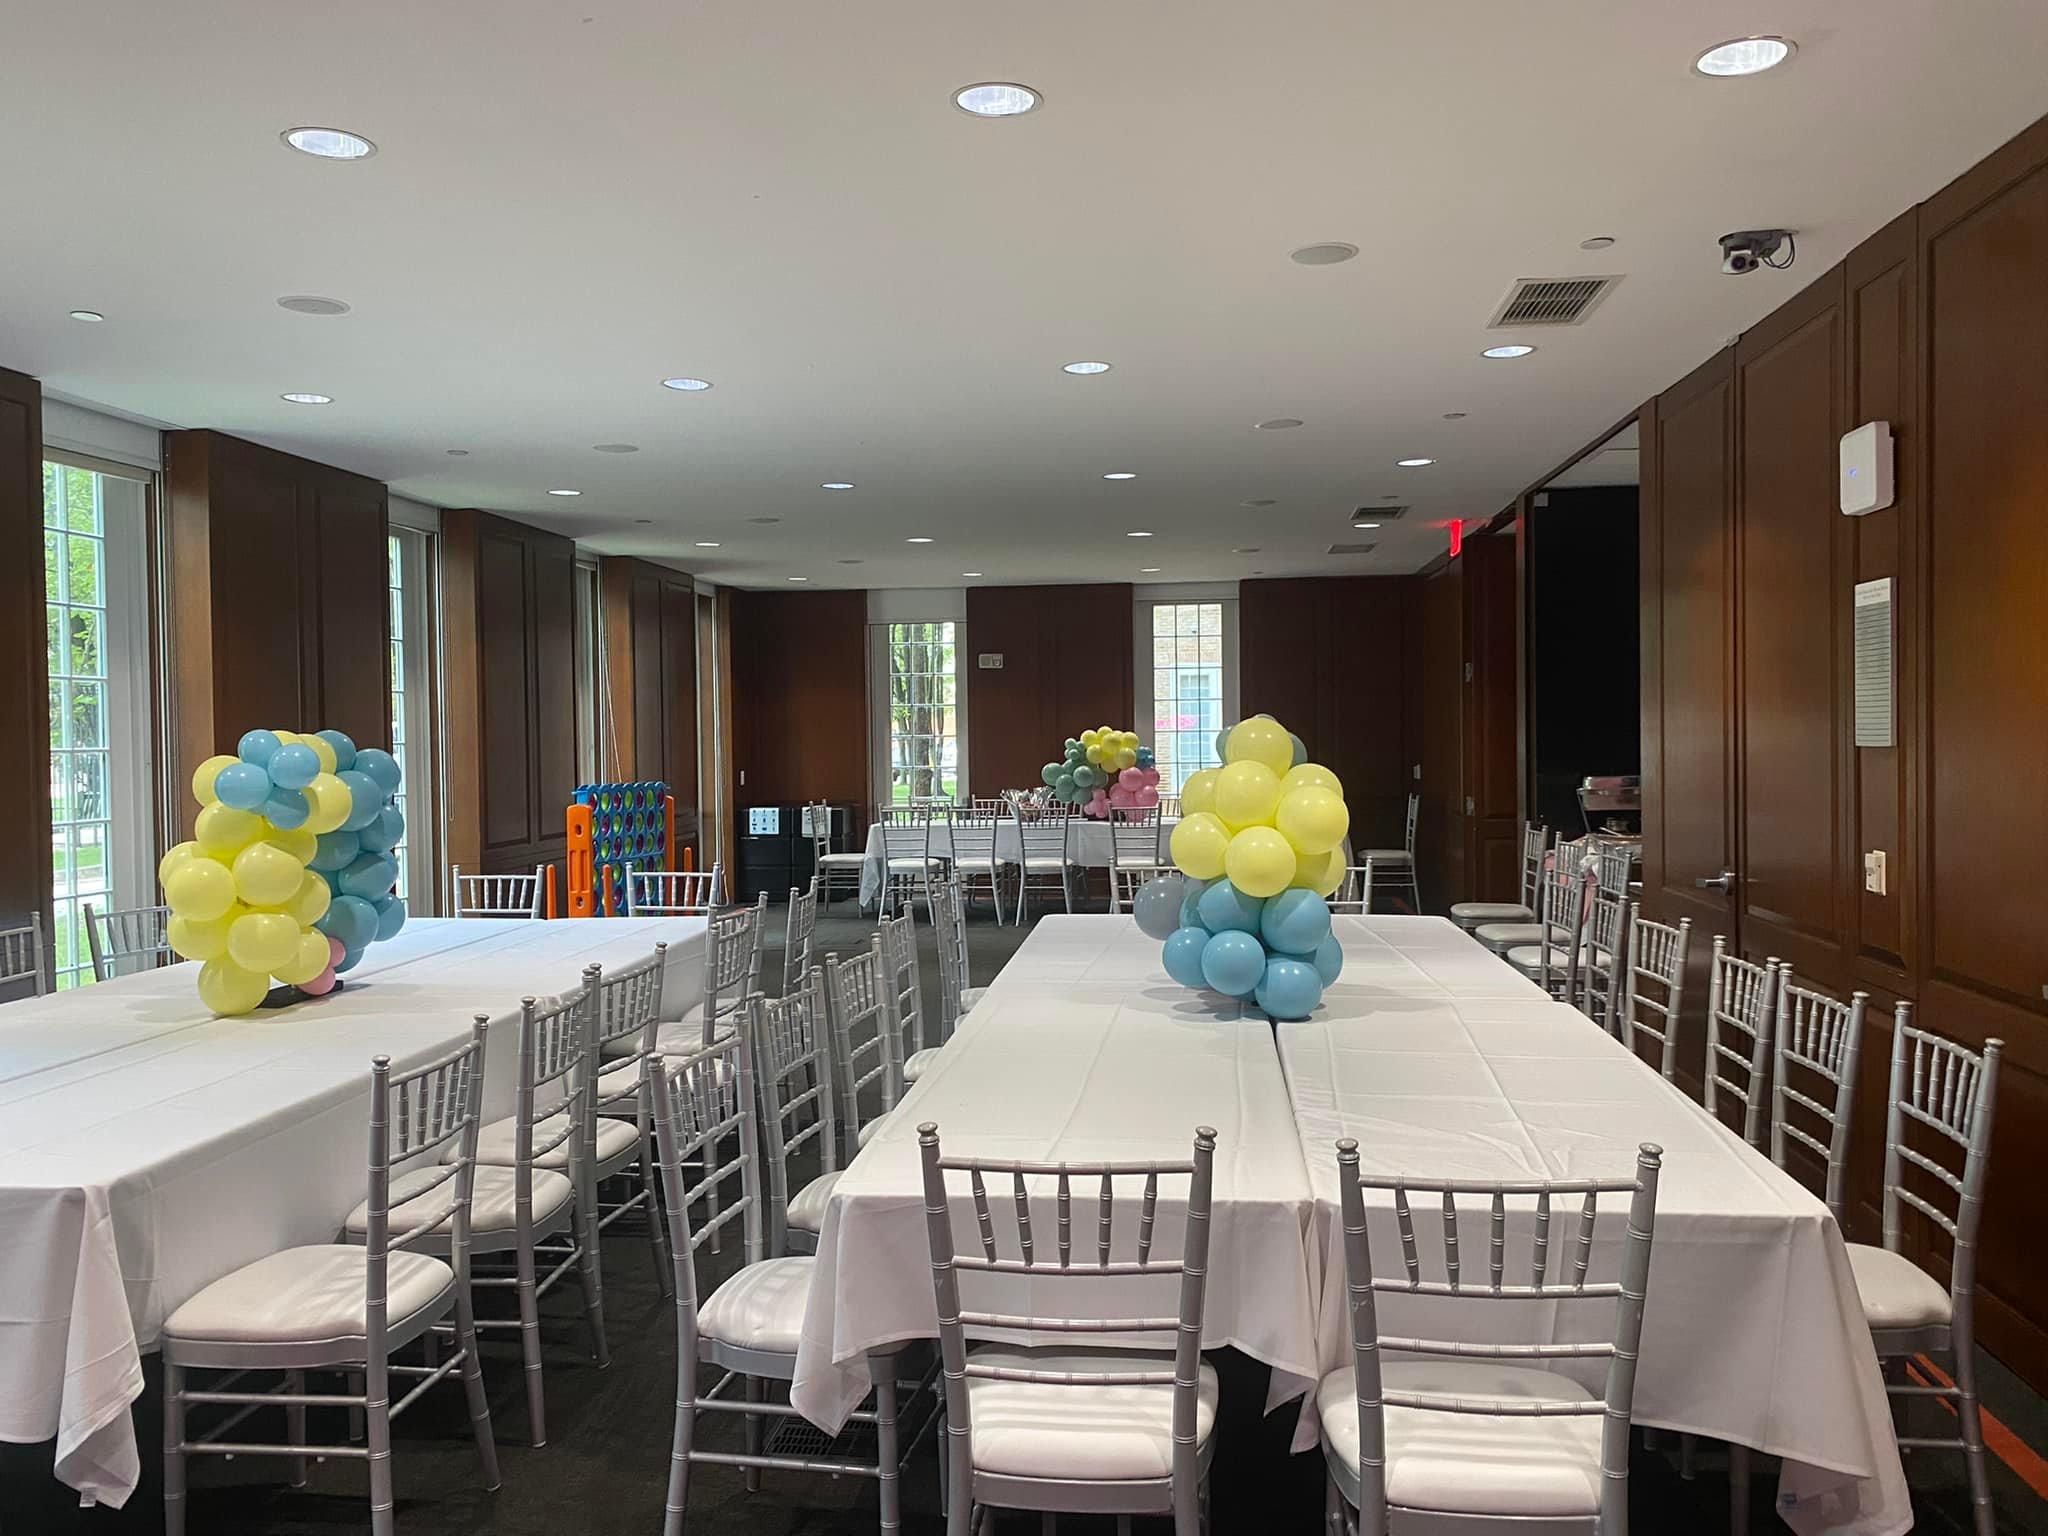 Long tables with white linens